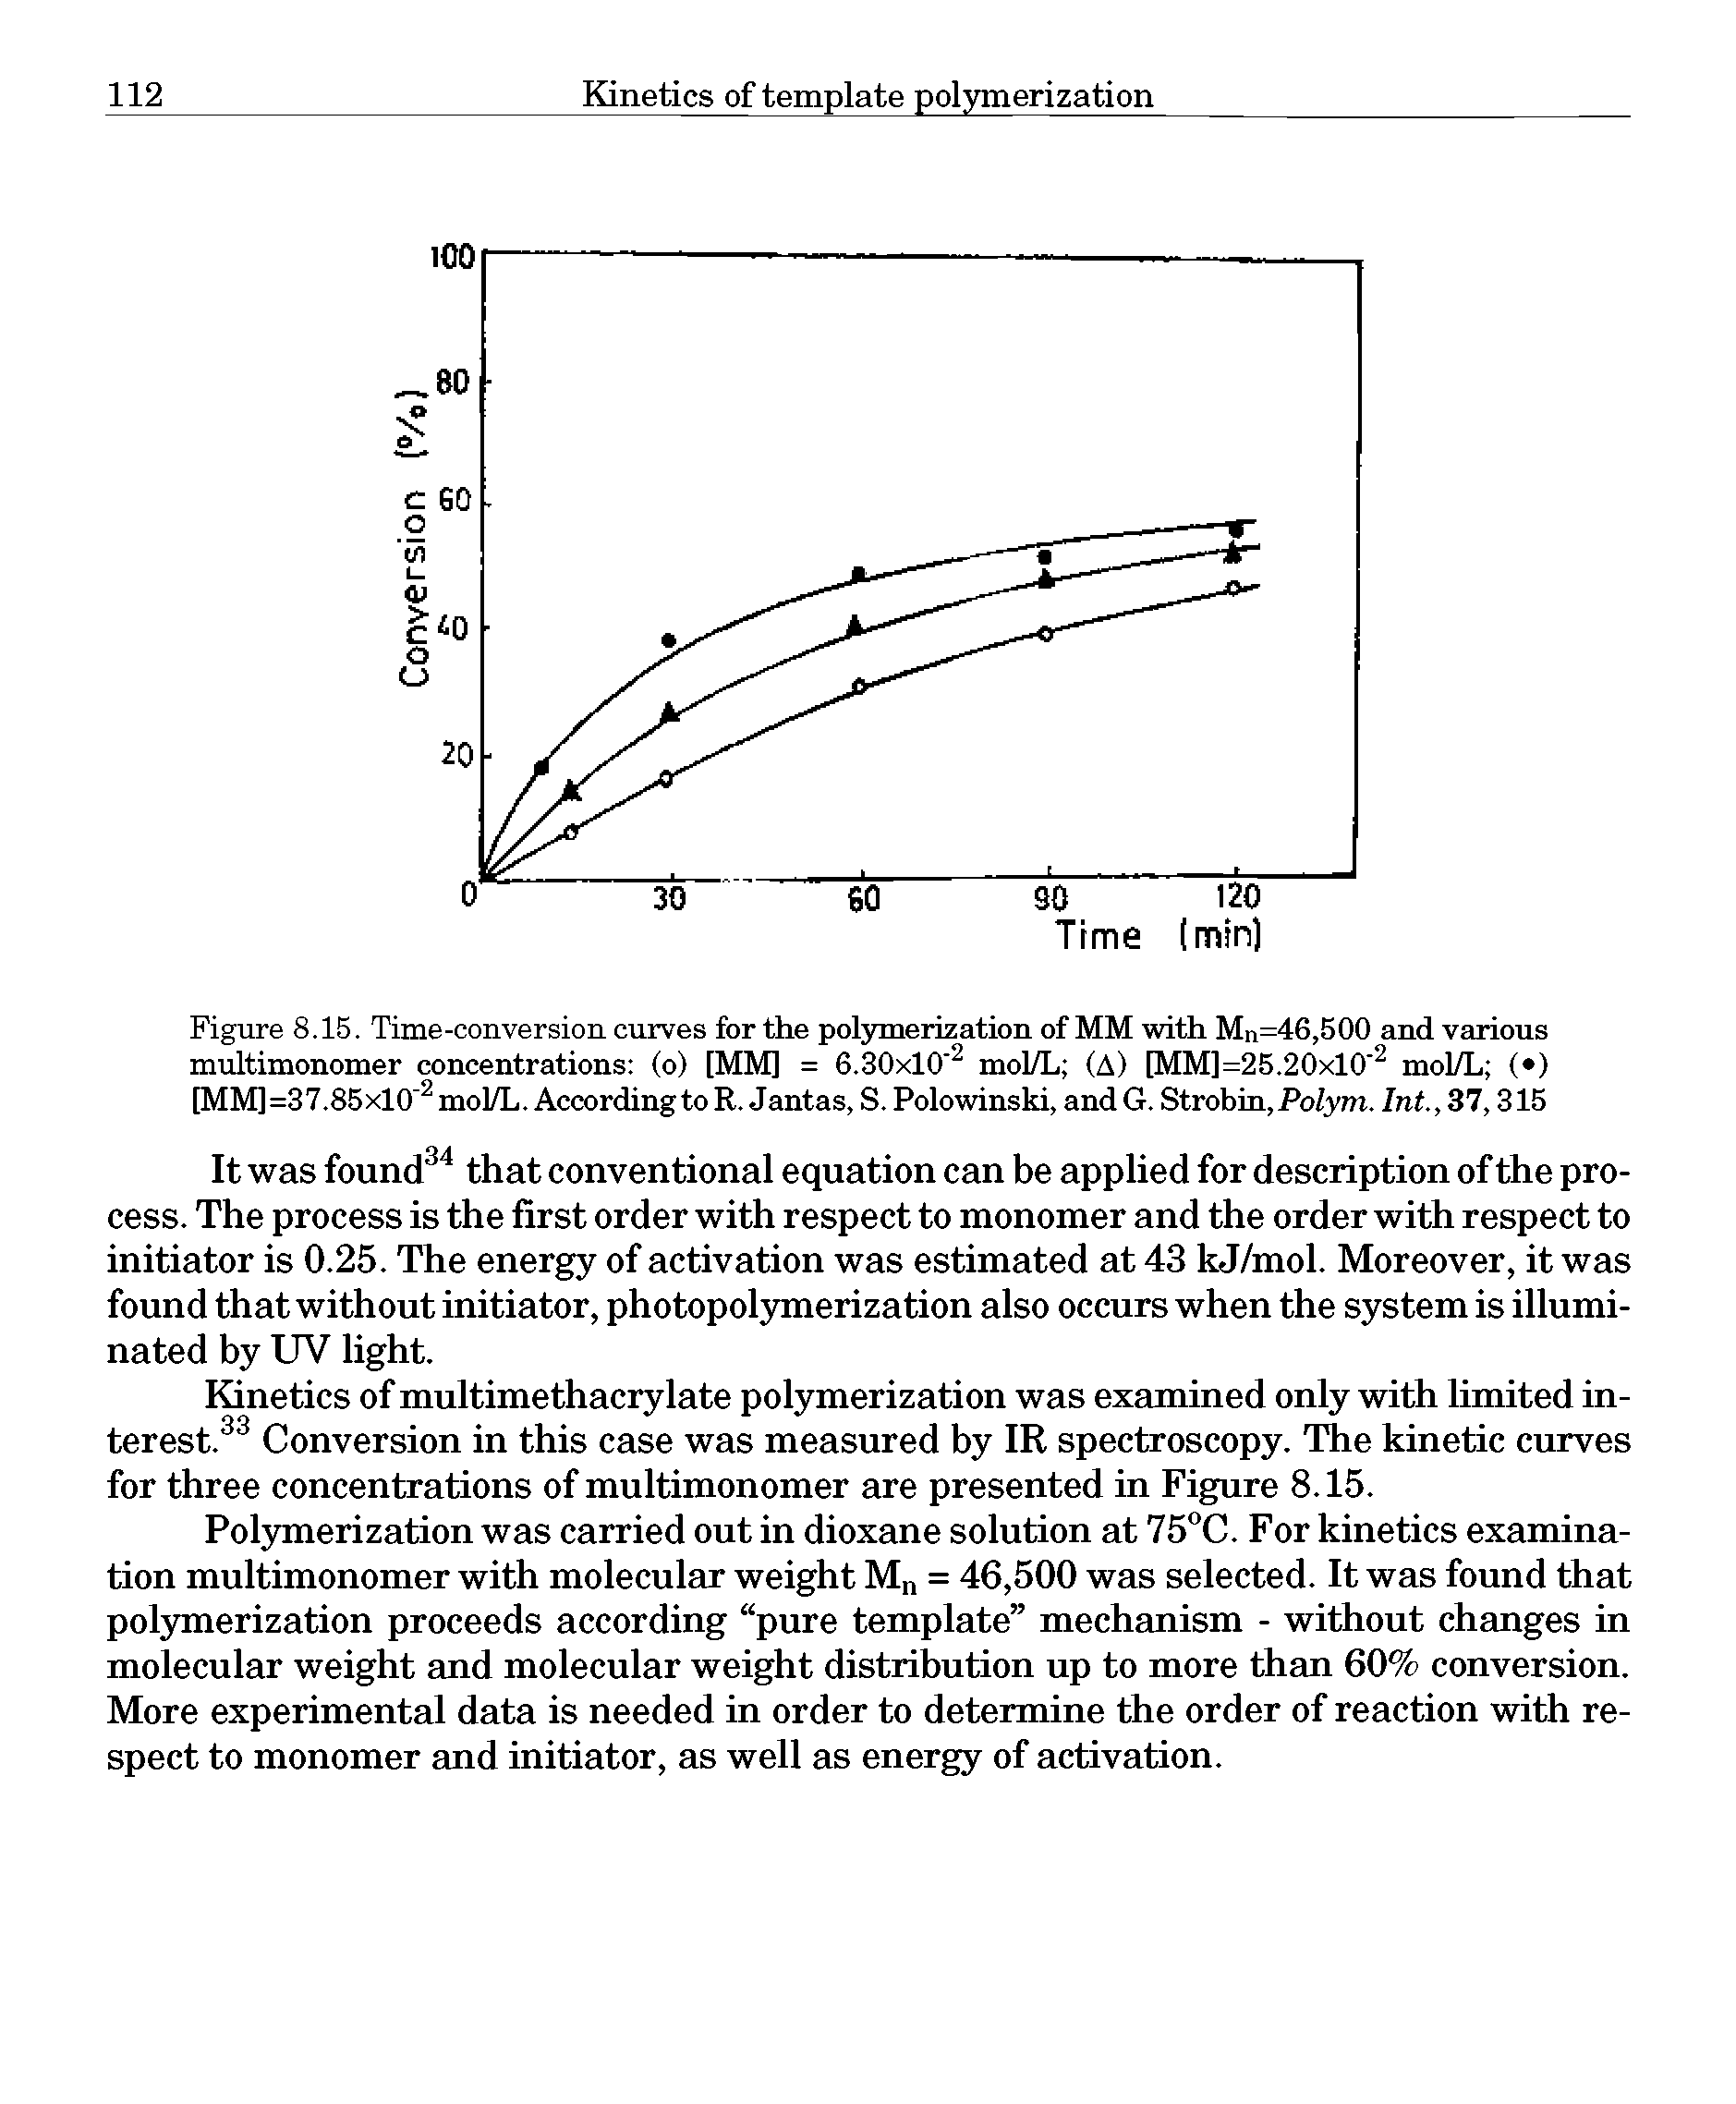 Figure 8.15. Time-conversion curves for the pol5nnerization of MM with Mn=46,500 and various multimonomer concentrations (o) [MM] = 6.30x10 mol/L (A) [MM]=25.20xl0 mol/L ( )...